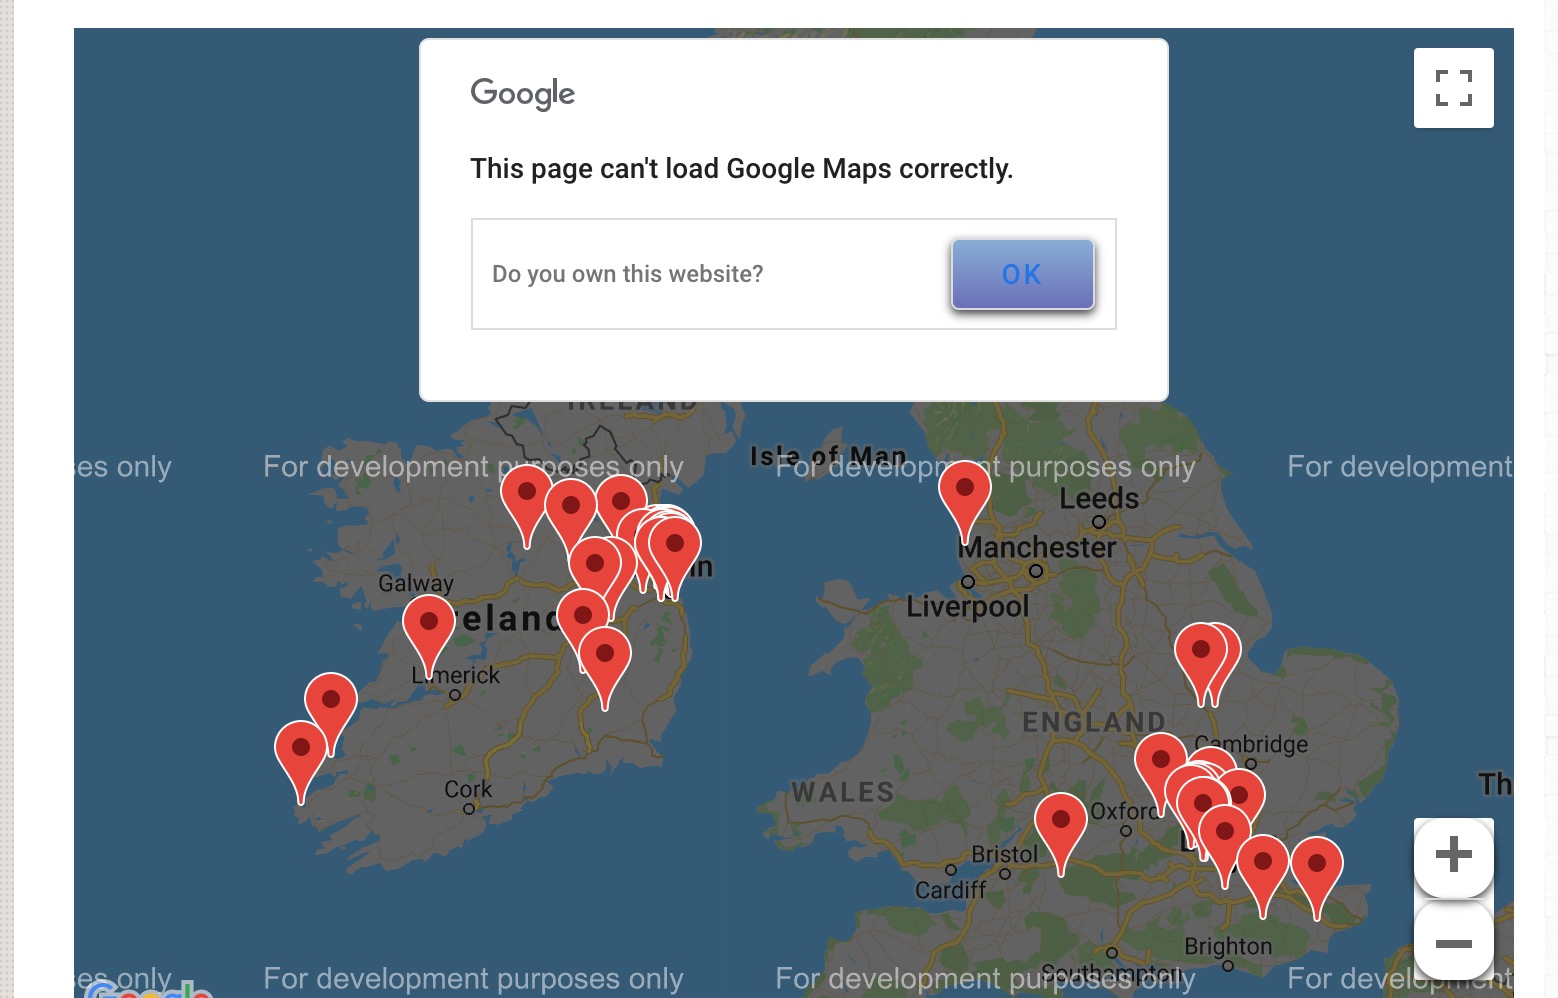 This page can't load Google Maps correctly.